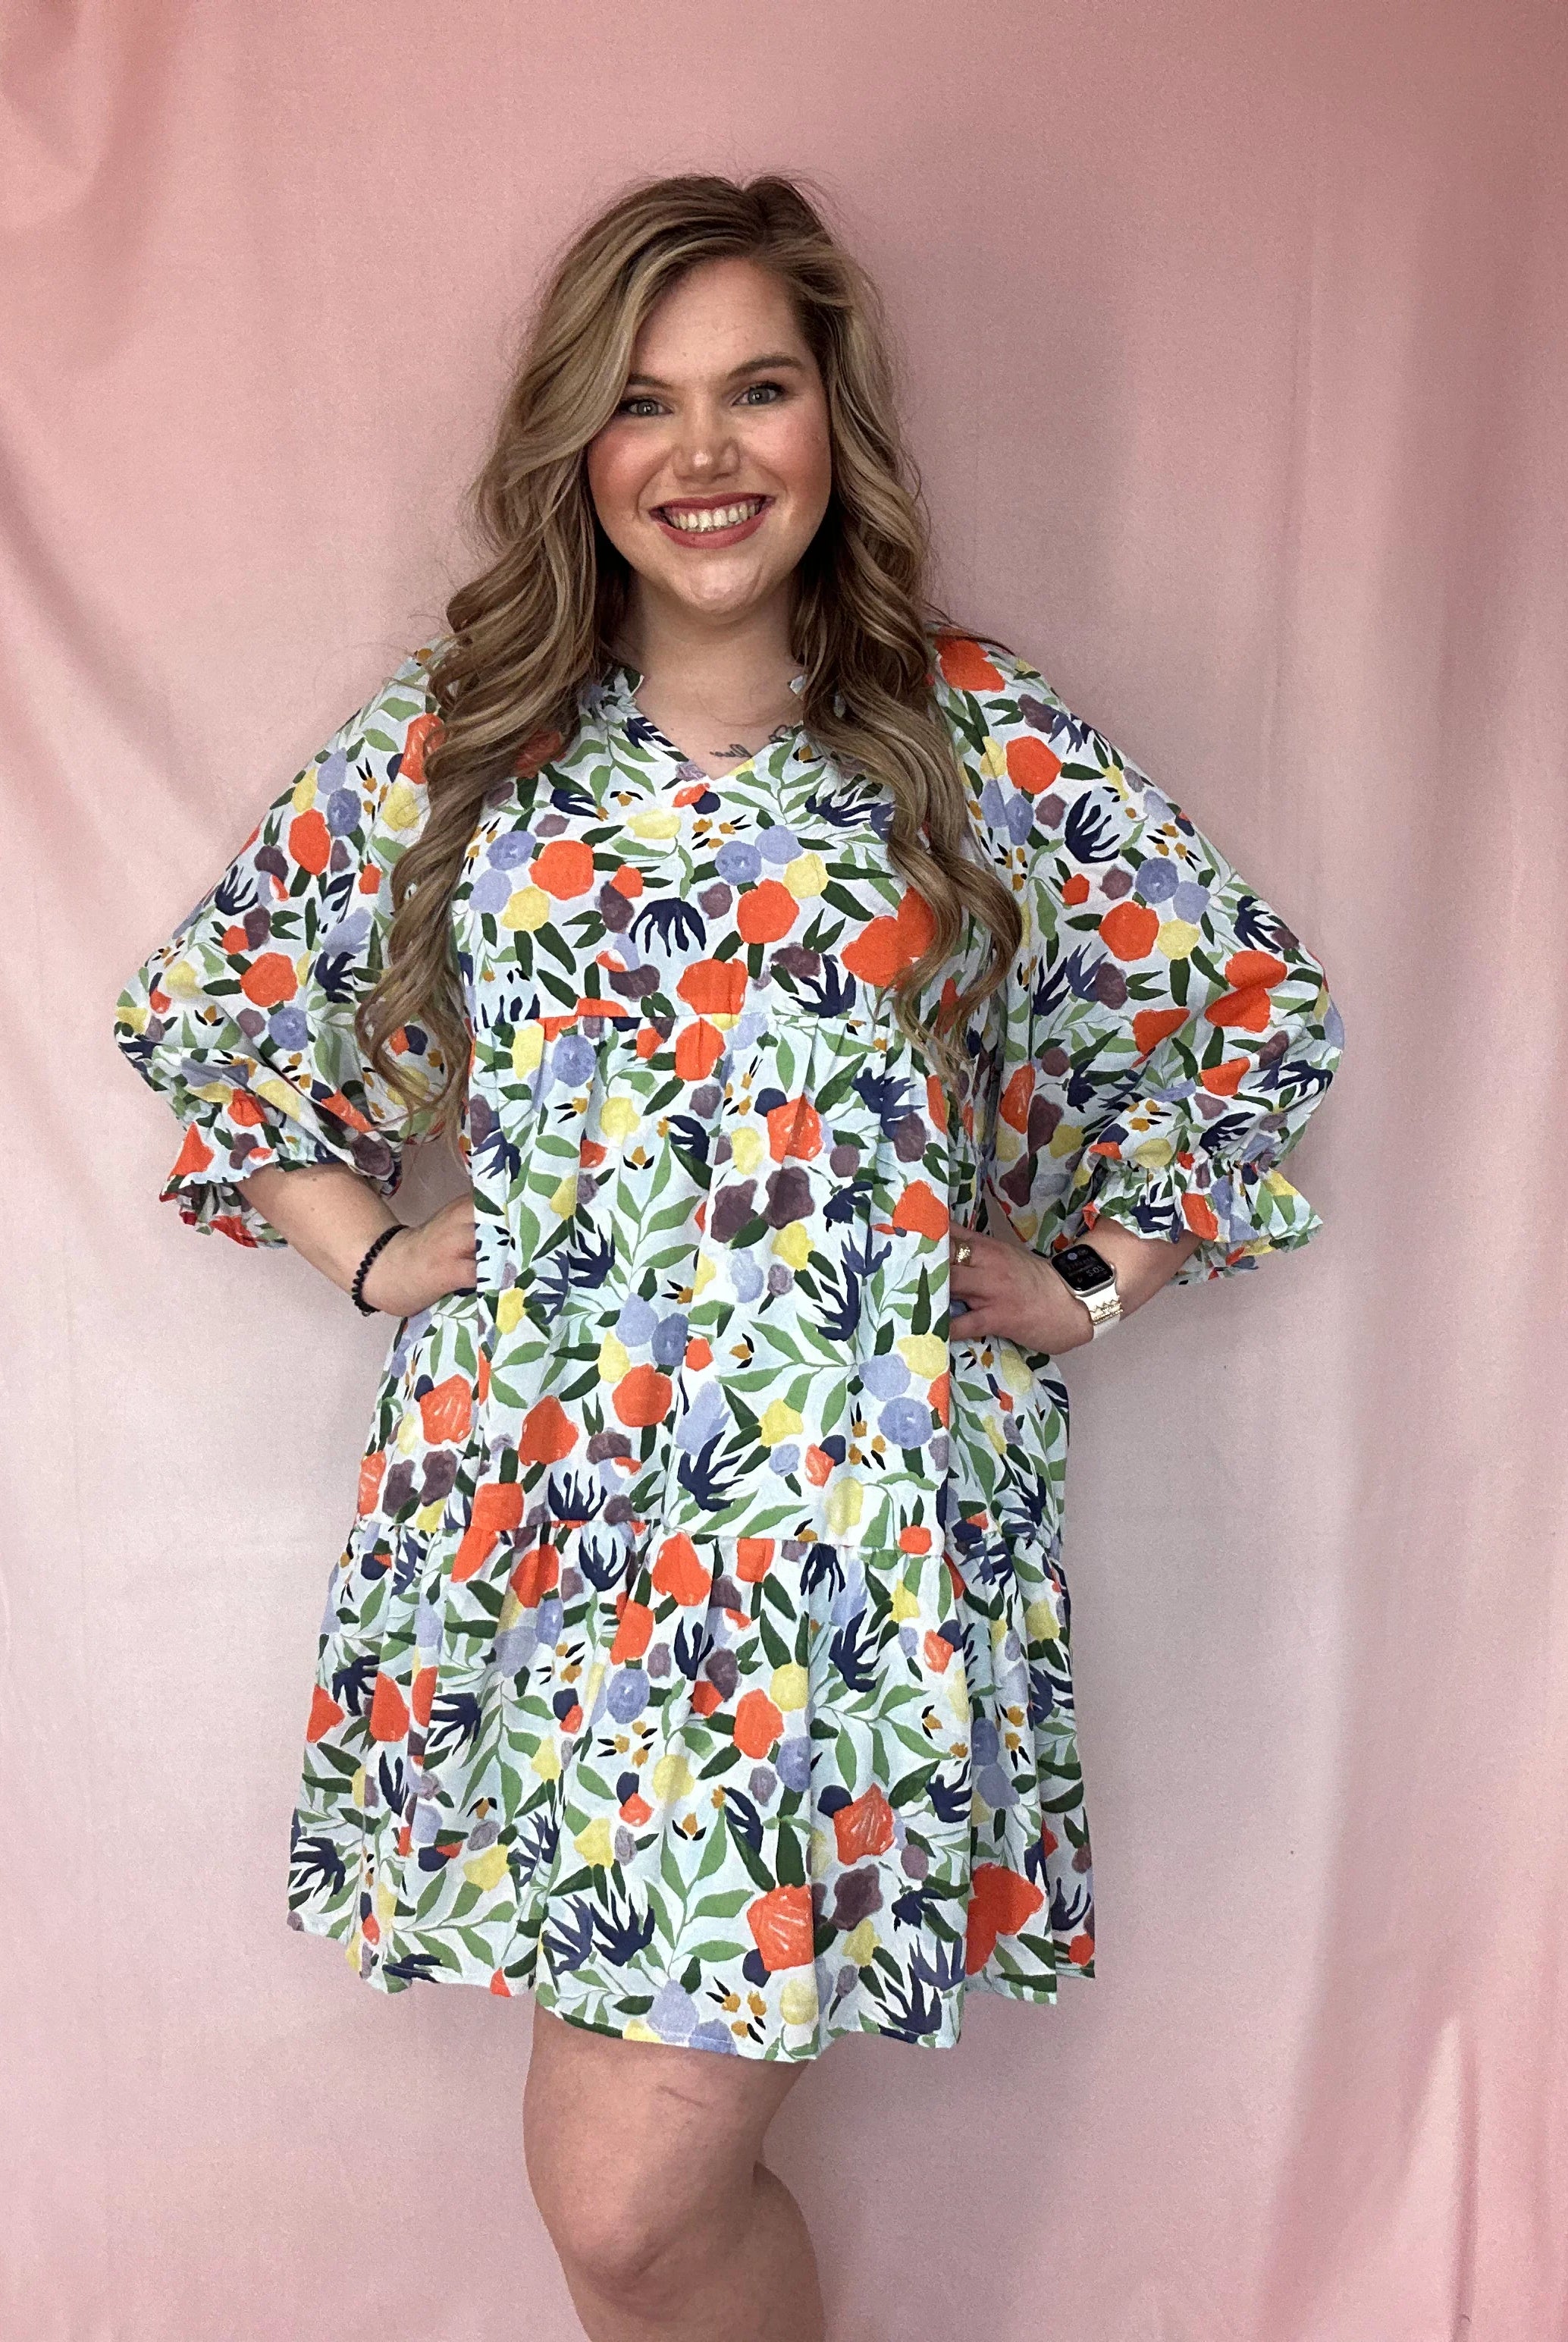 Girl Wearing A Long Puff Sleeve Orange, Blue, and Sage Floral Print Dress | Podos Boutique